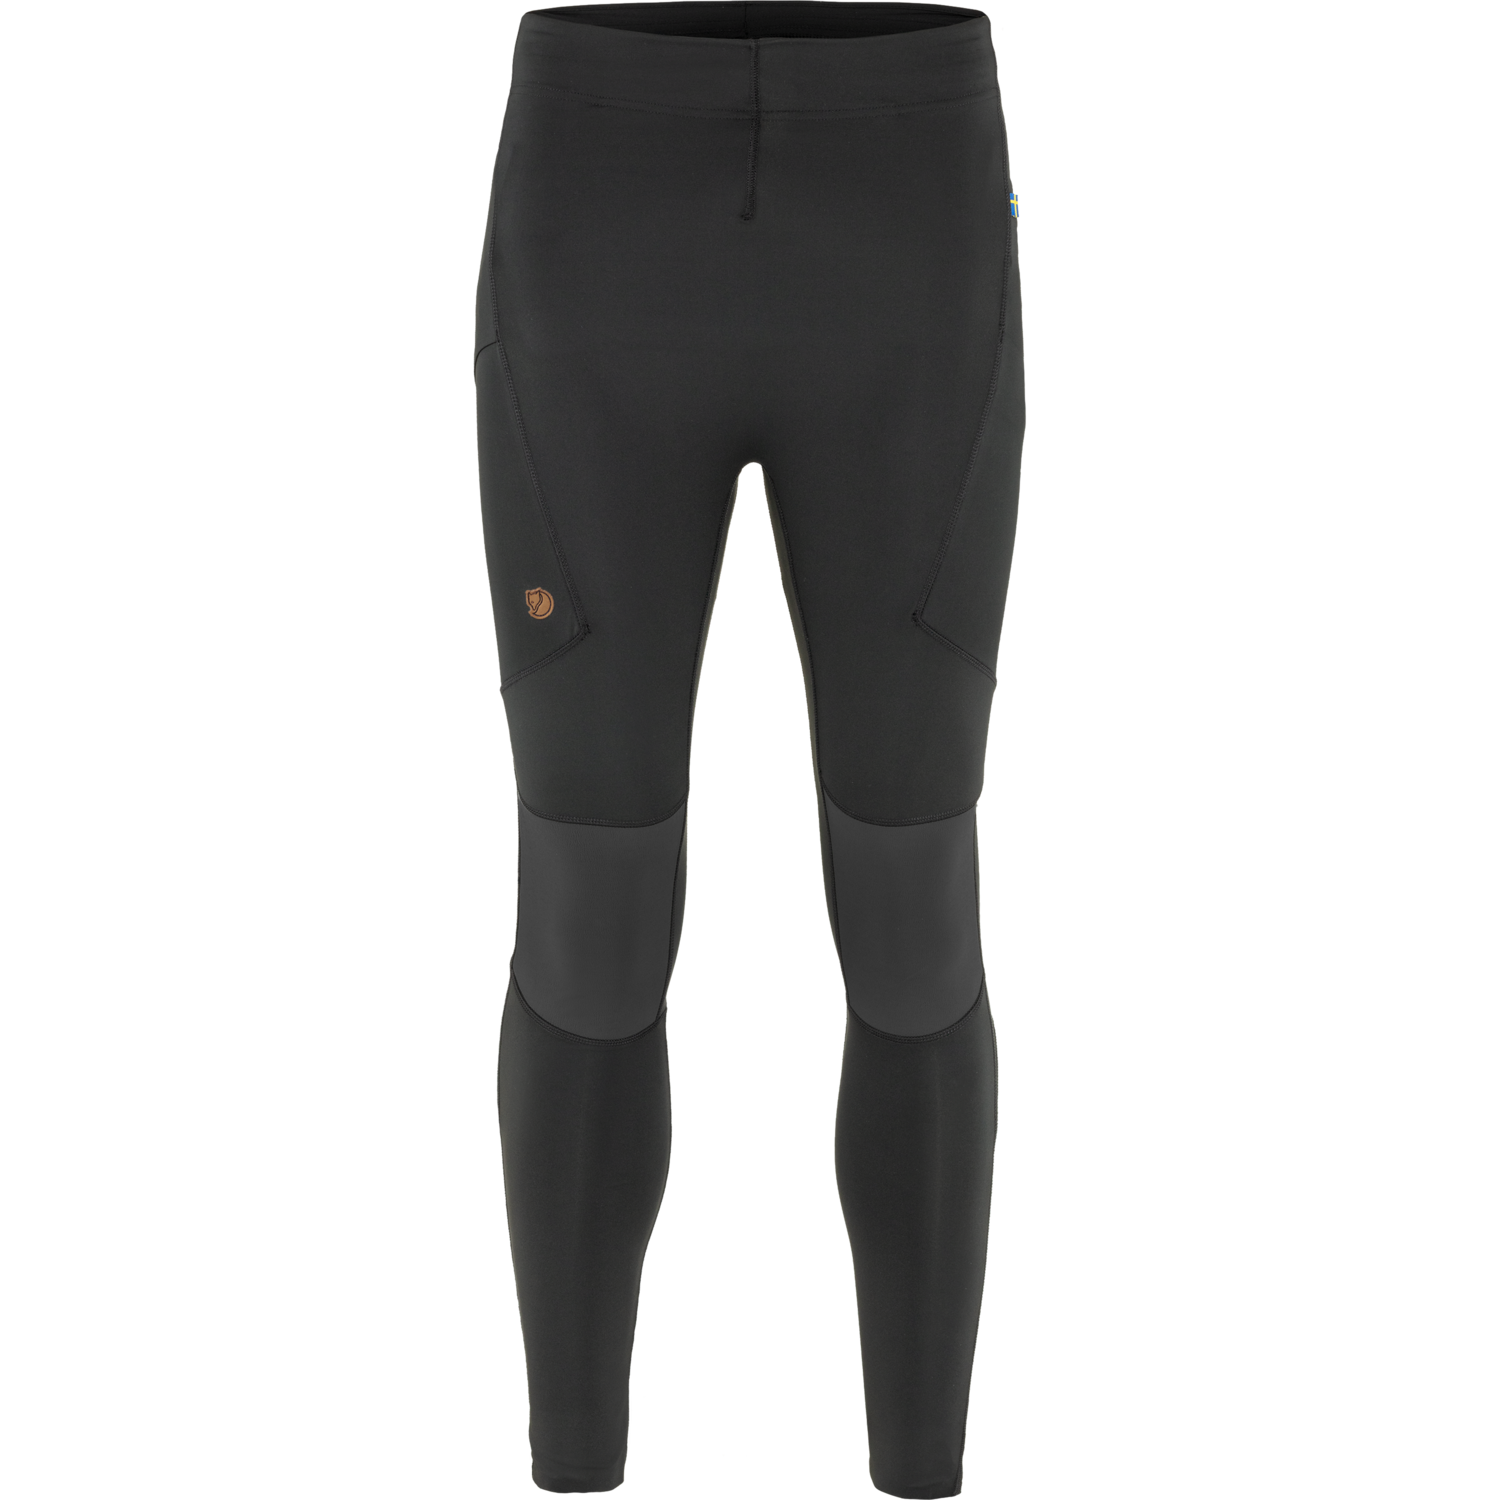 Black and grey skinny fit trekking trousers for men